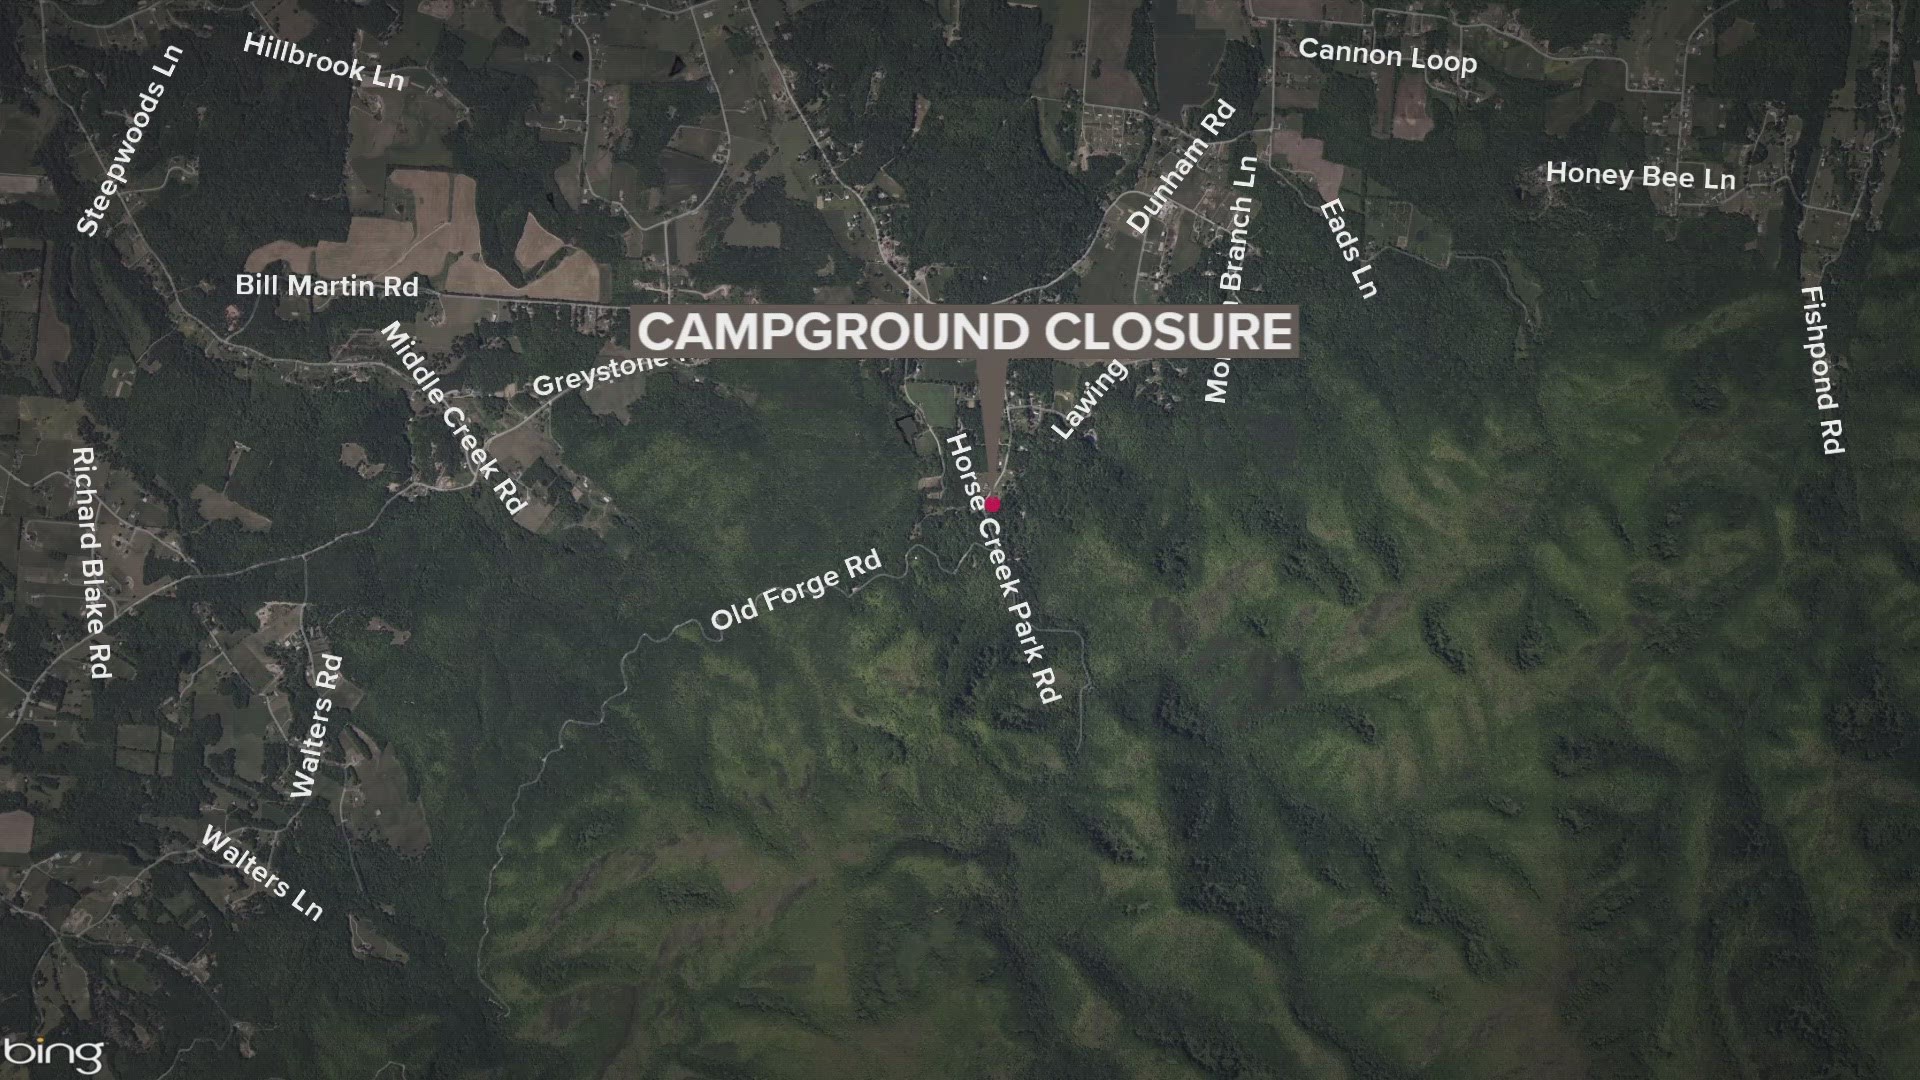 According to a release from the USDA, the TWRA recommended the campground be closed after the number of reports of bear encounters started rising.